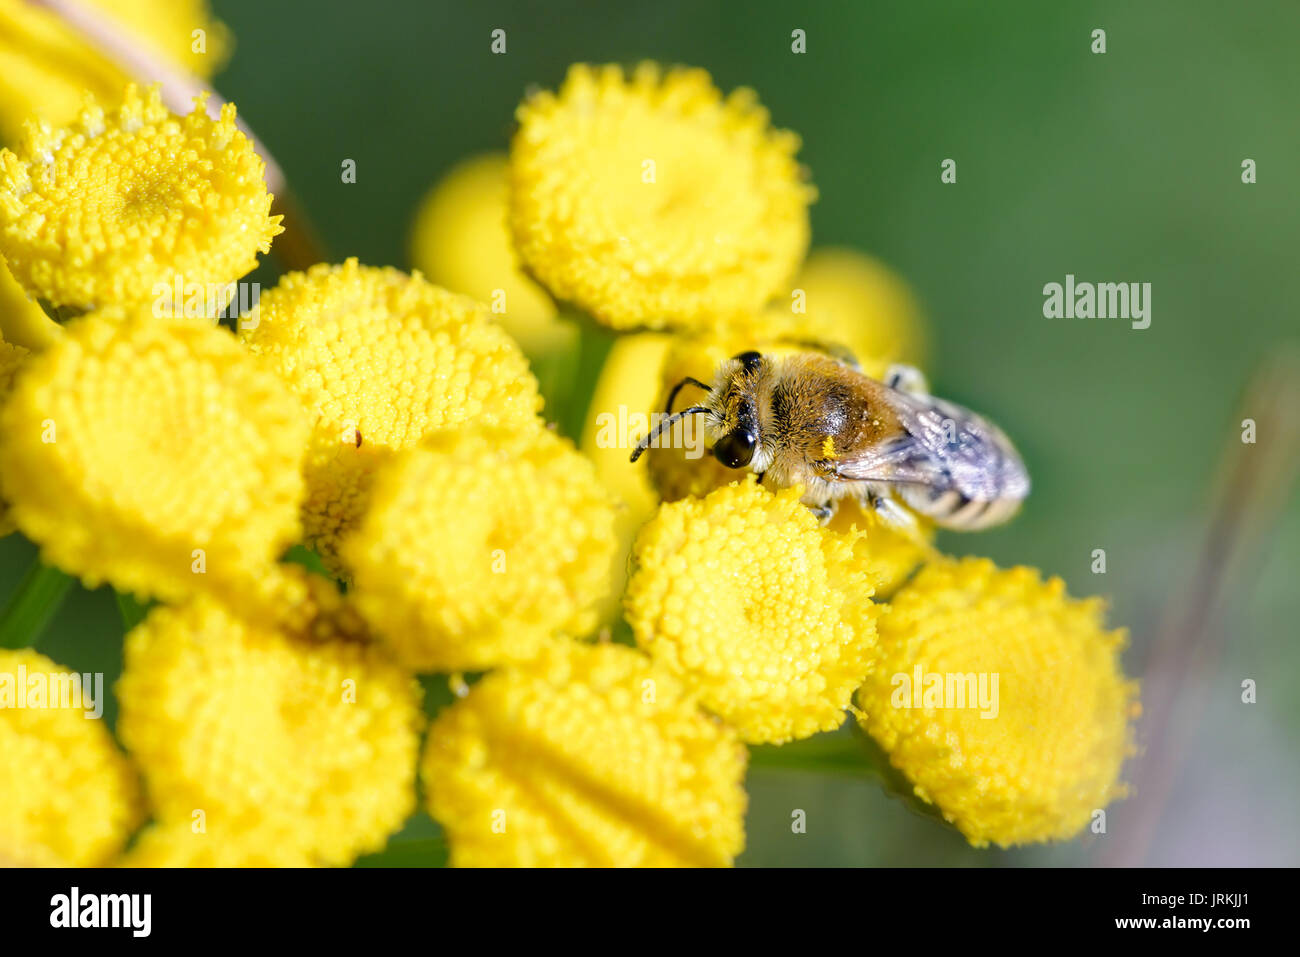 A Colletes simulans also known as plasterer bee or or polyester bee, foraging on a yellow Tansy flower (Tanacetum vulgare), under the warm summer sun. Stock Photo